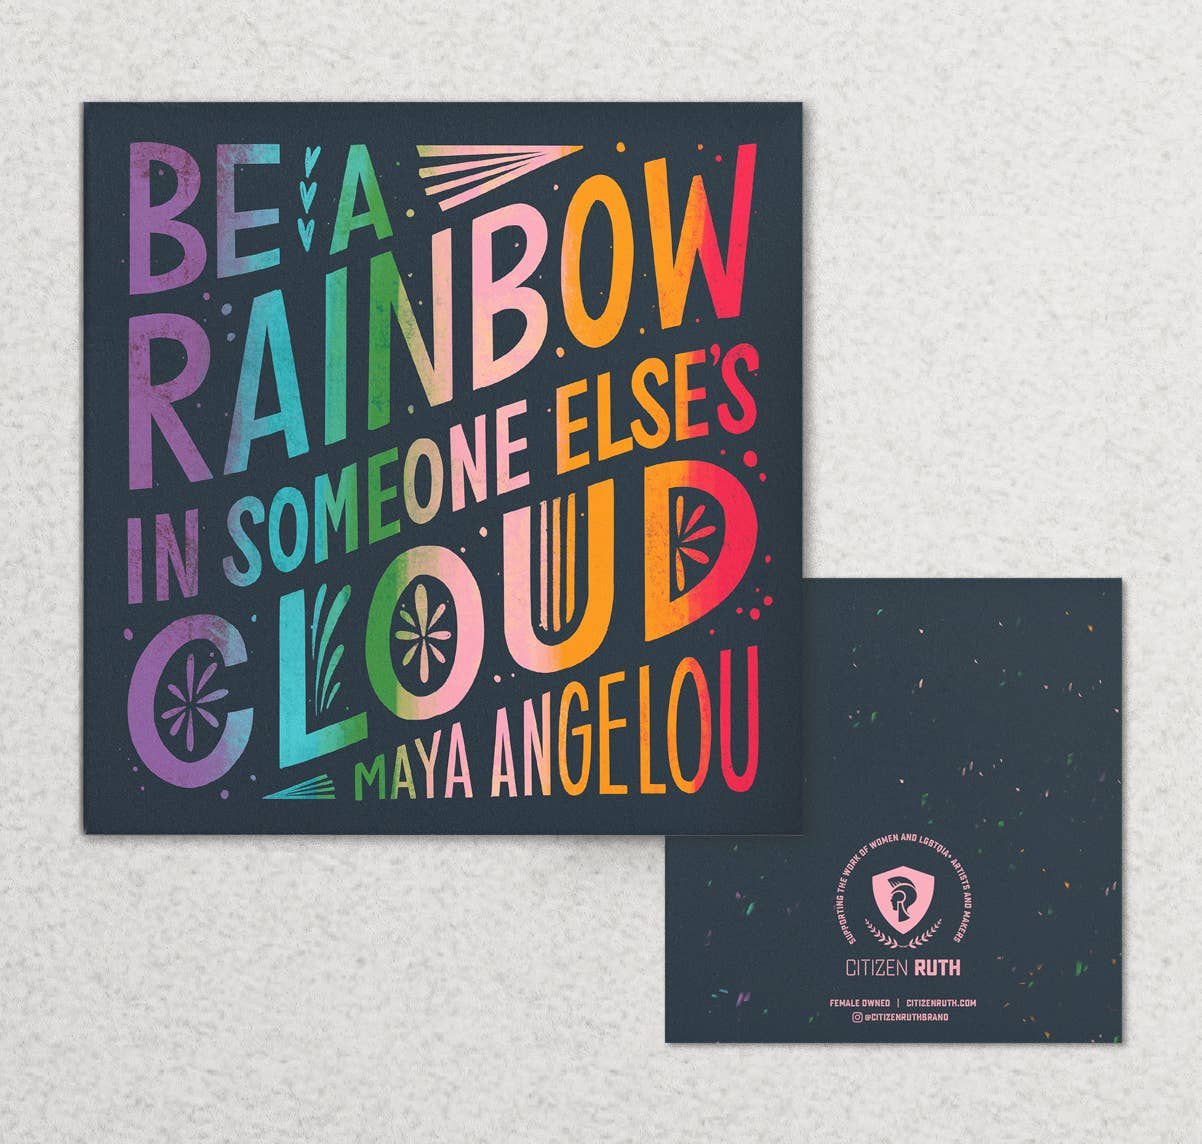 Be a rainbow in someone else's card - Maya Angelou quote card with Navy background by Citizen Ruth